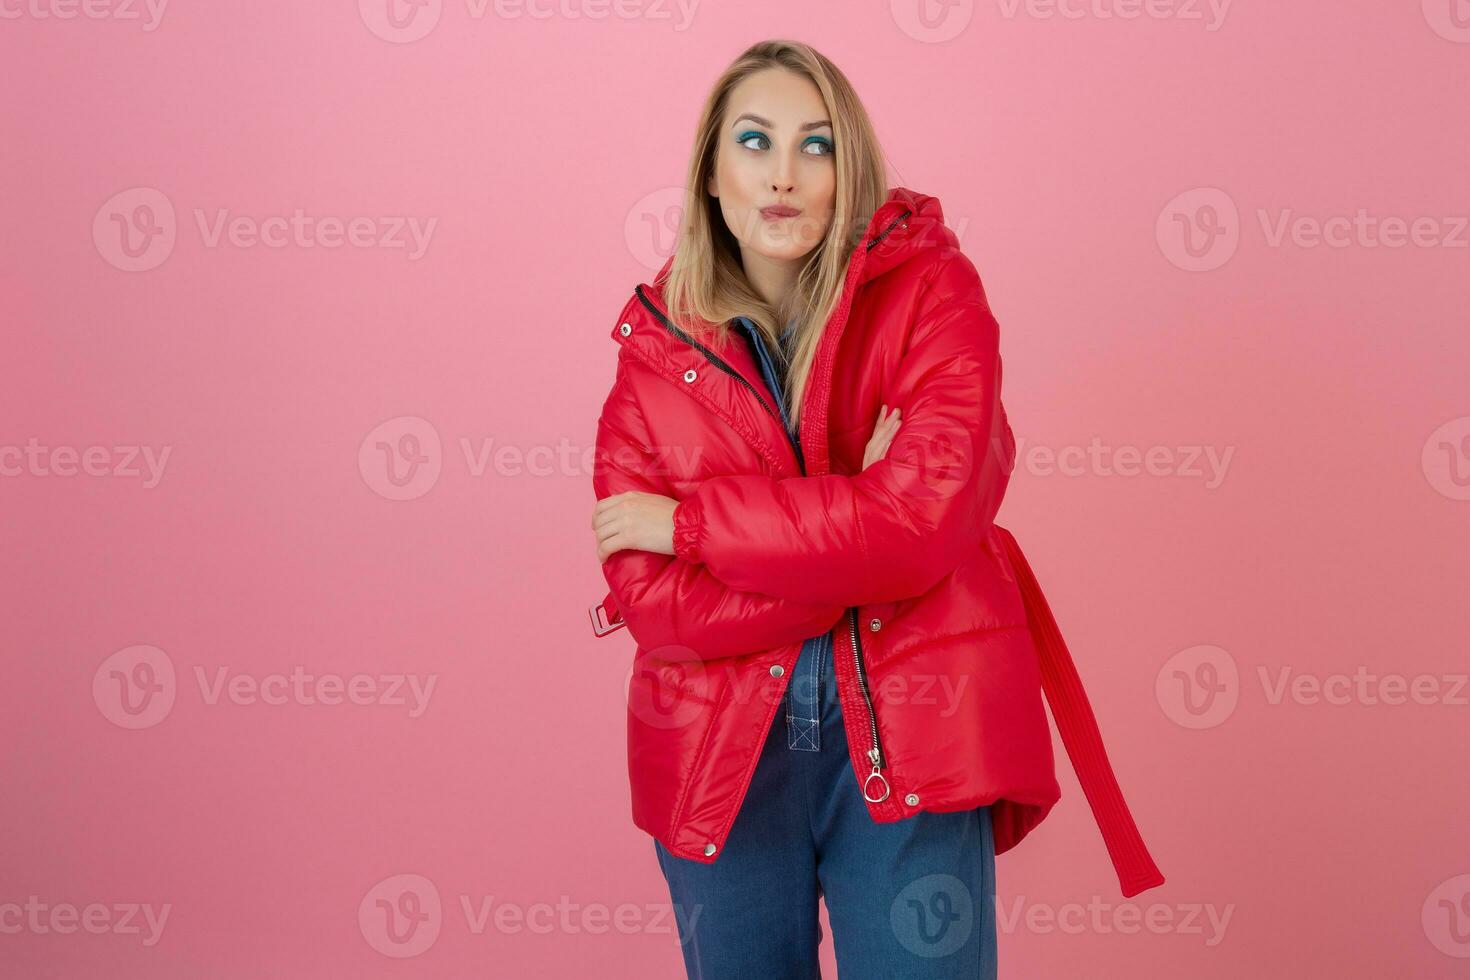 blond happy attractive active woman posing on pink background in colorful winter down jacket of red color, having fun, warm coat fashion trend, smiling photo